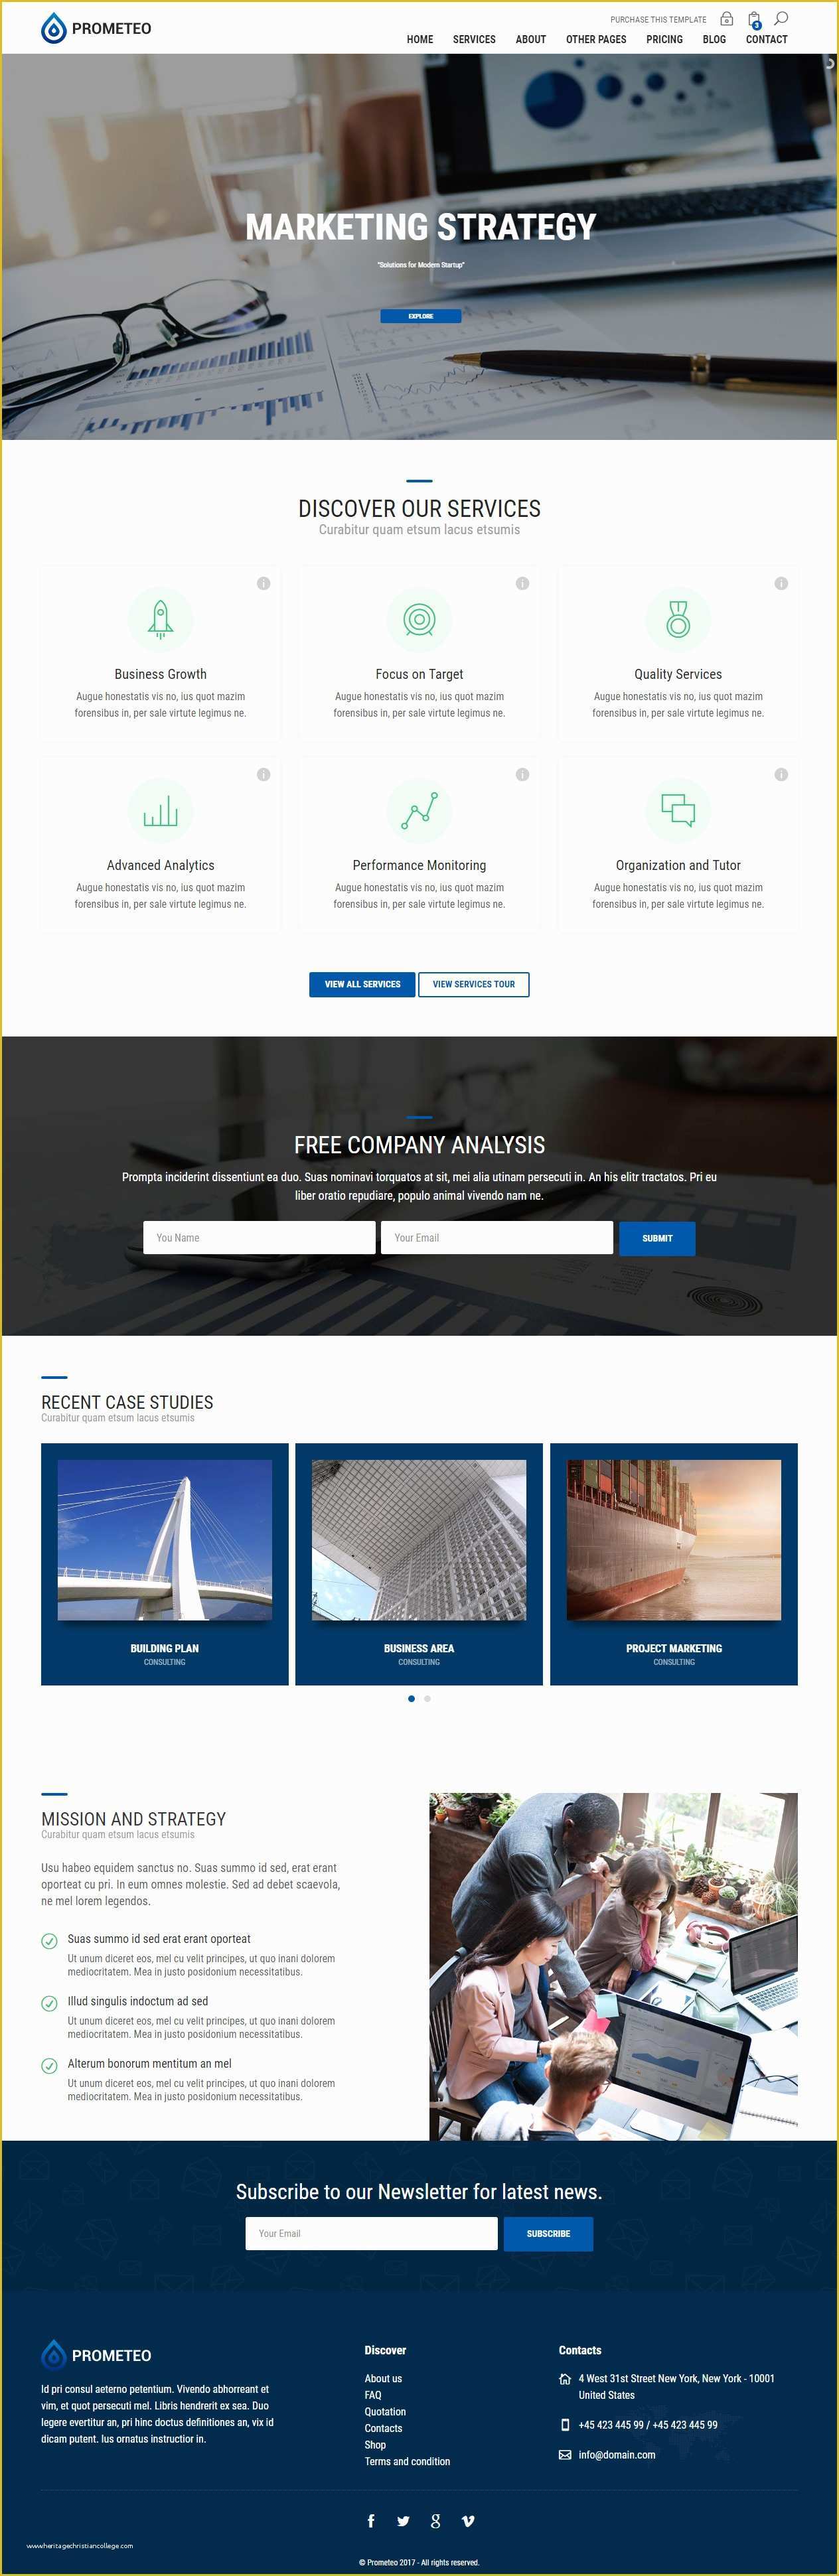 Html5 Template Free 2017 Of 25 Best Responsive HTML5 Finance Website Templates 2017